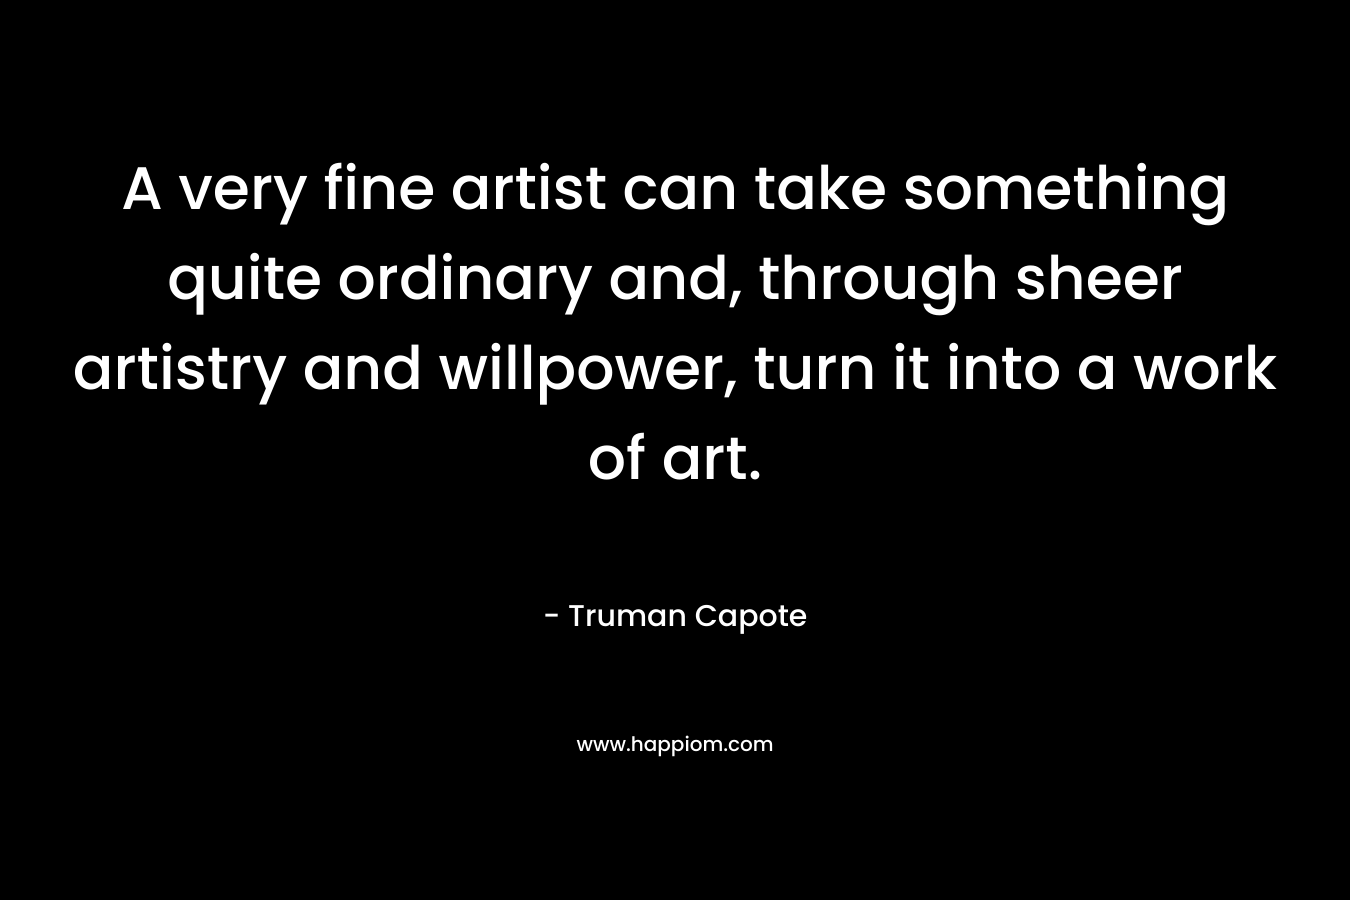 A very fine artist can take something quite ordinary and, through sheer artistry and willpower, turn it into a work of art.